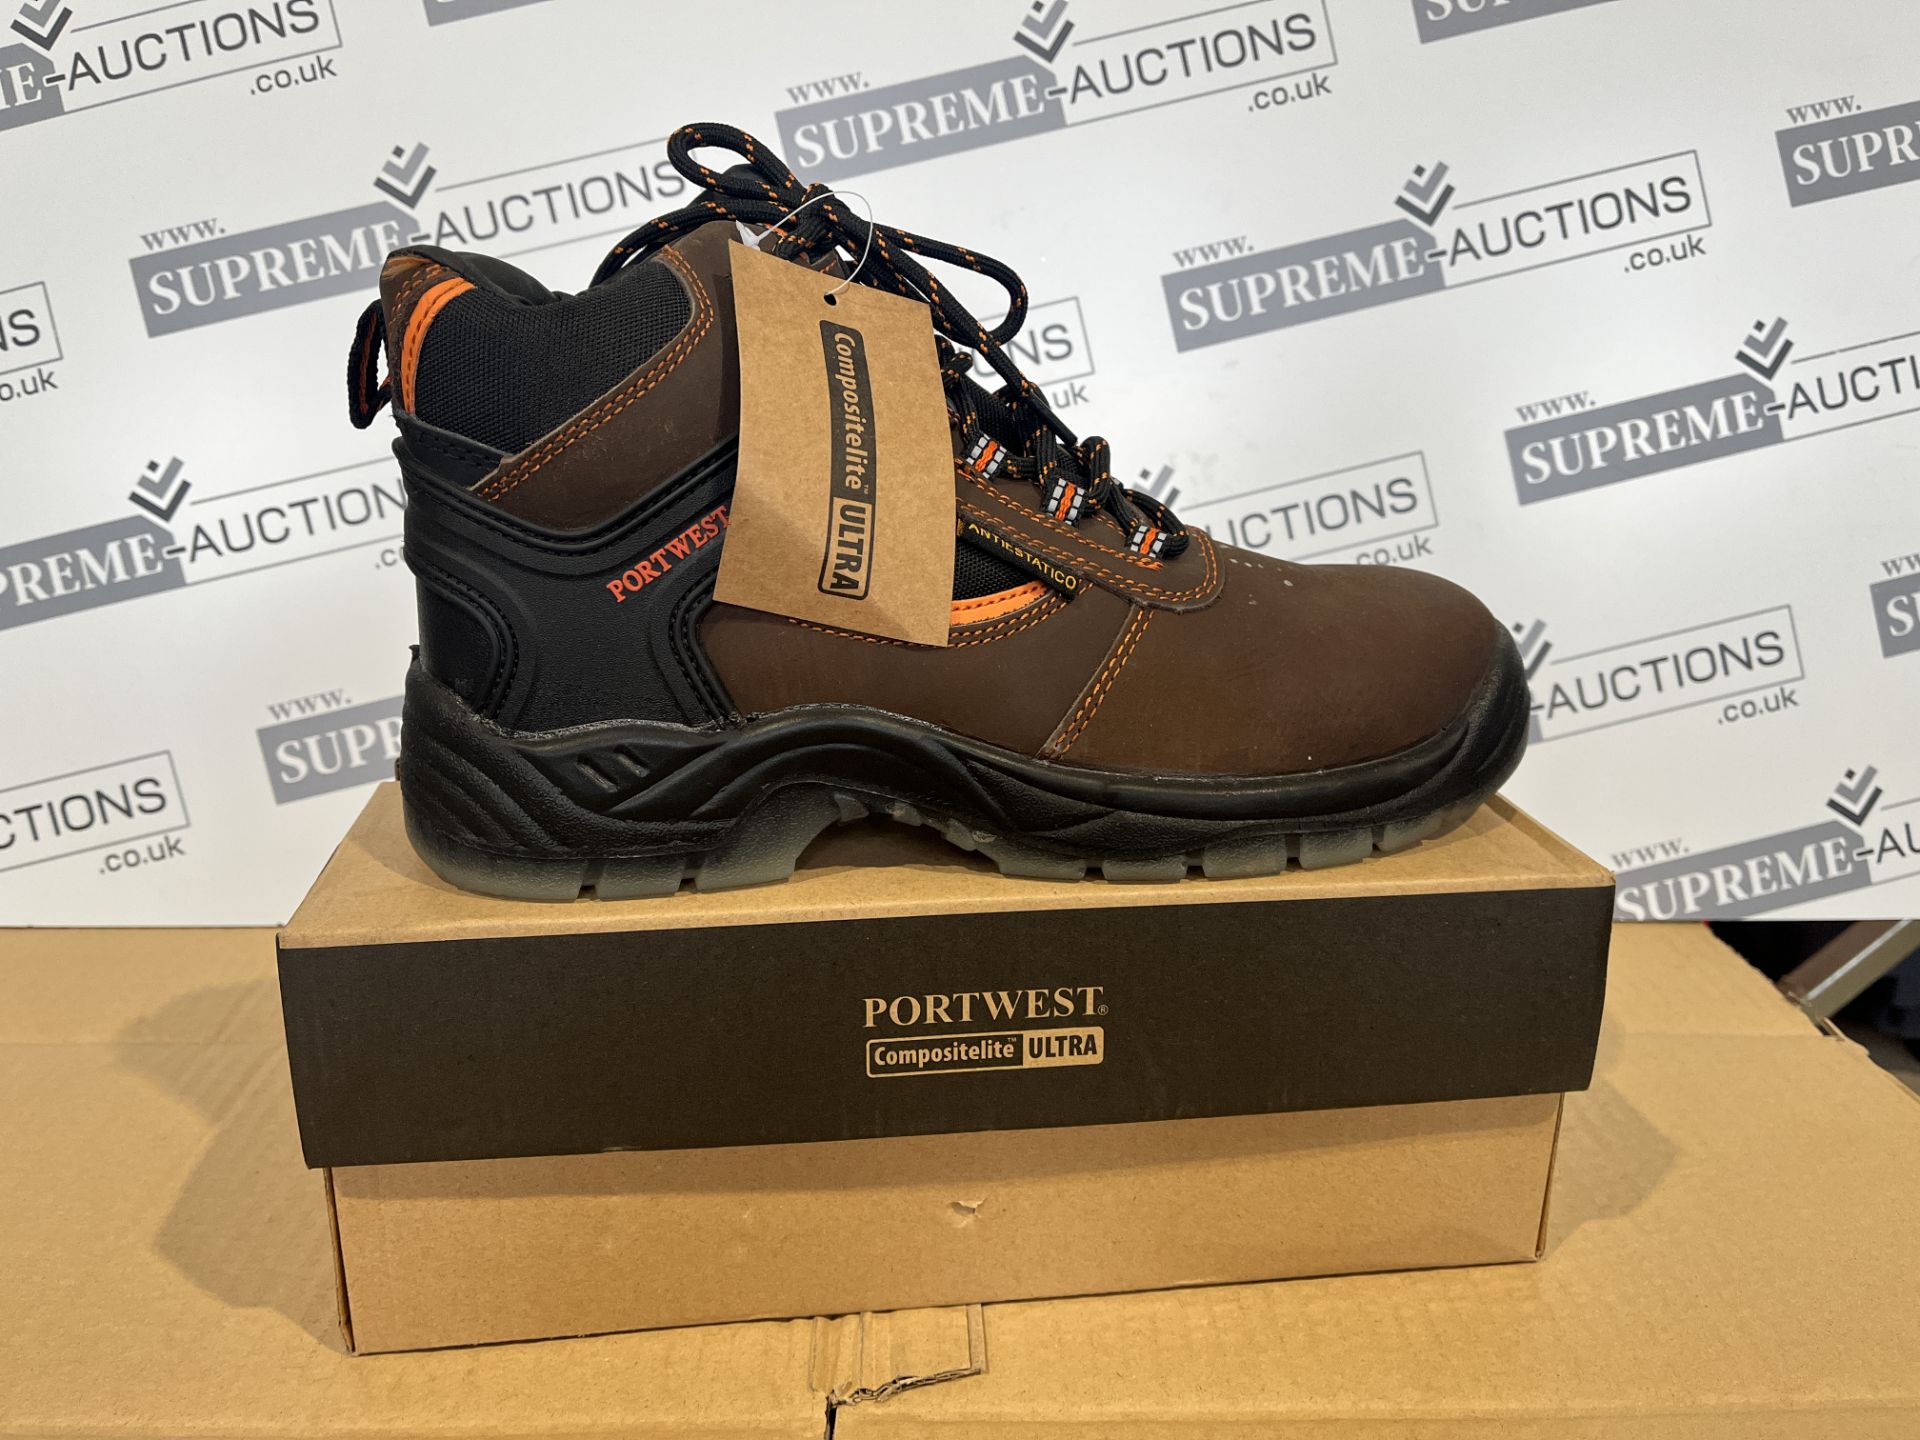 5 X BRAND NEW PORTWEST PROFESSIONAL WORK BOOTS SIZE 7 S1-33